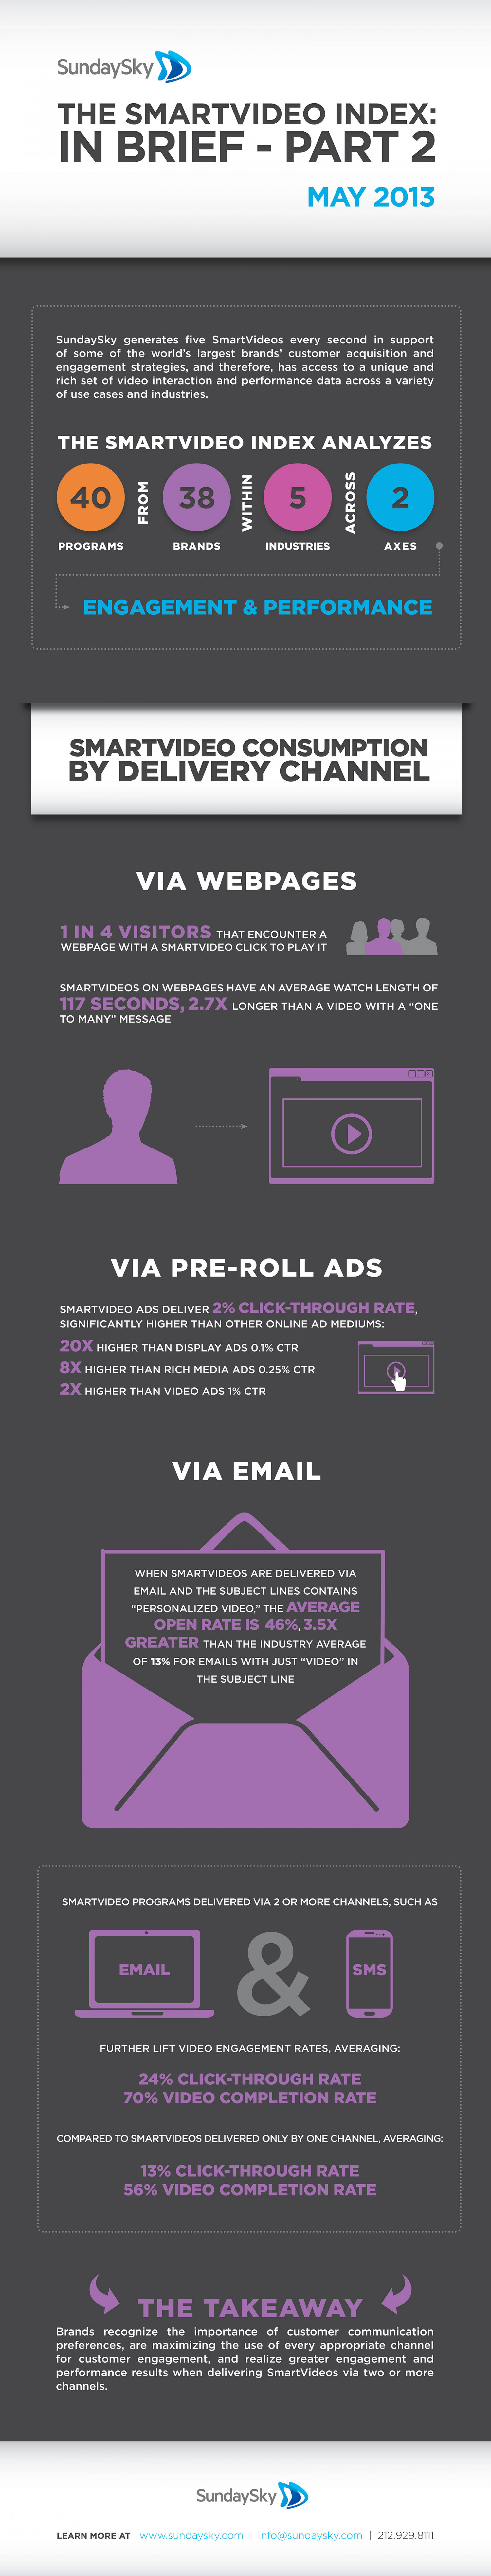 The SmartVideo Index: In Brief - Part 2 Infographic